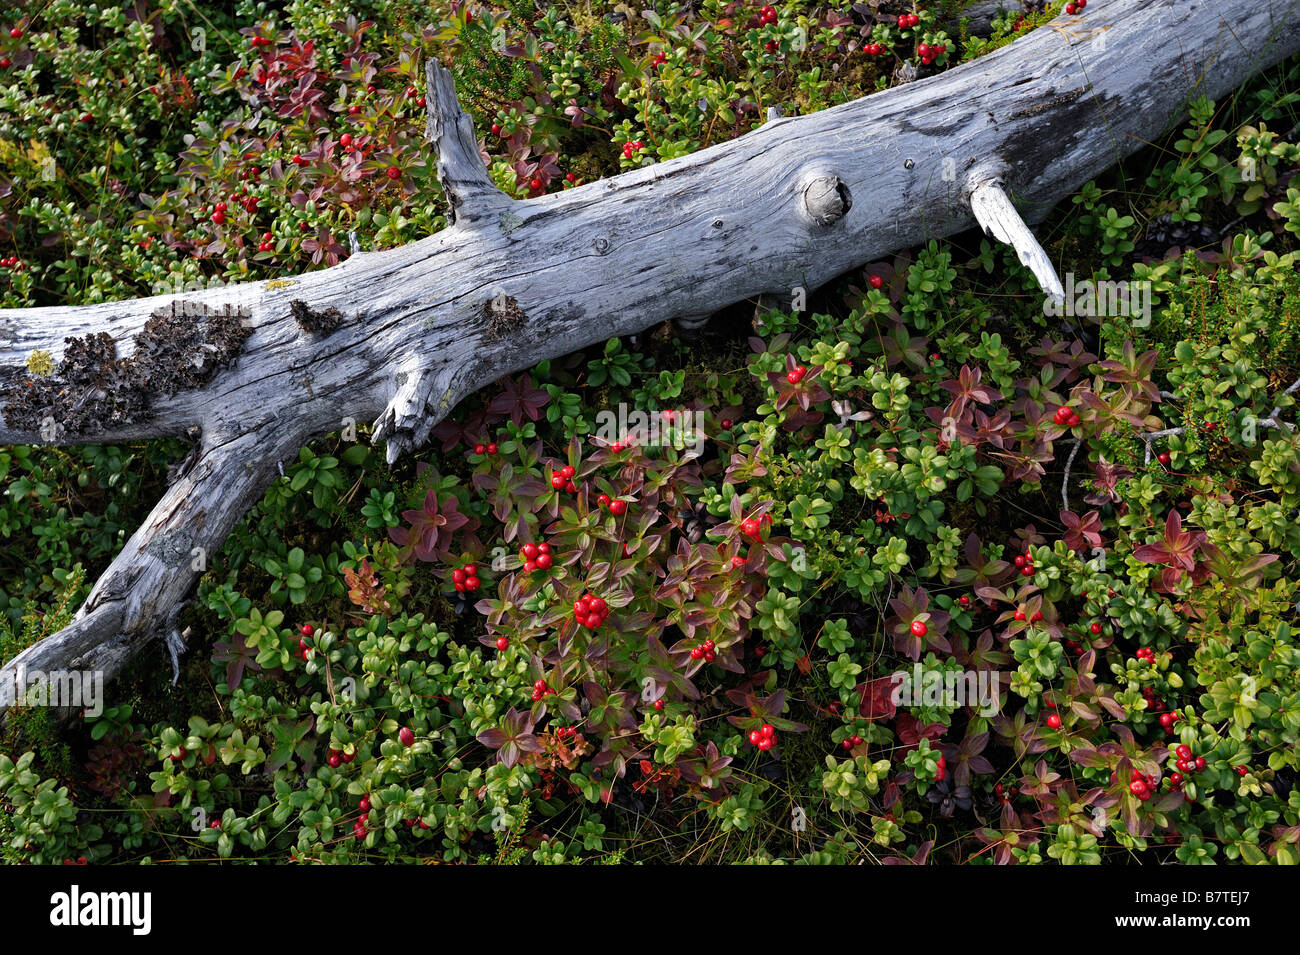 An arctic garden of bearberry and other dwarf shrubs with a dead pine branch near Fauske Norway Stock Photo